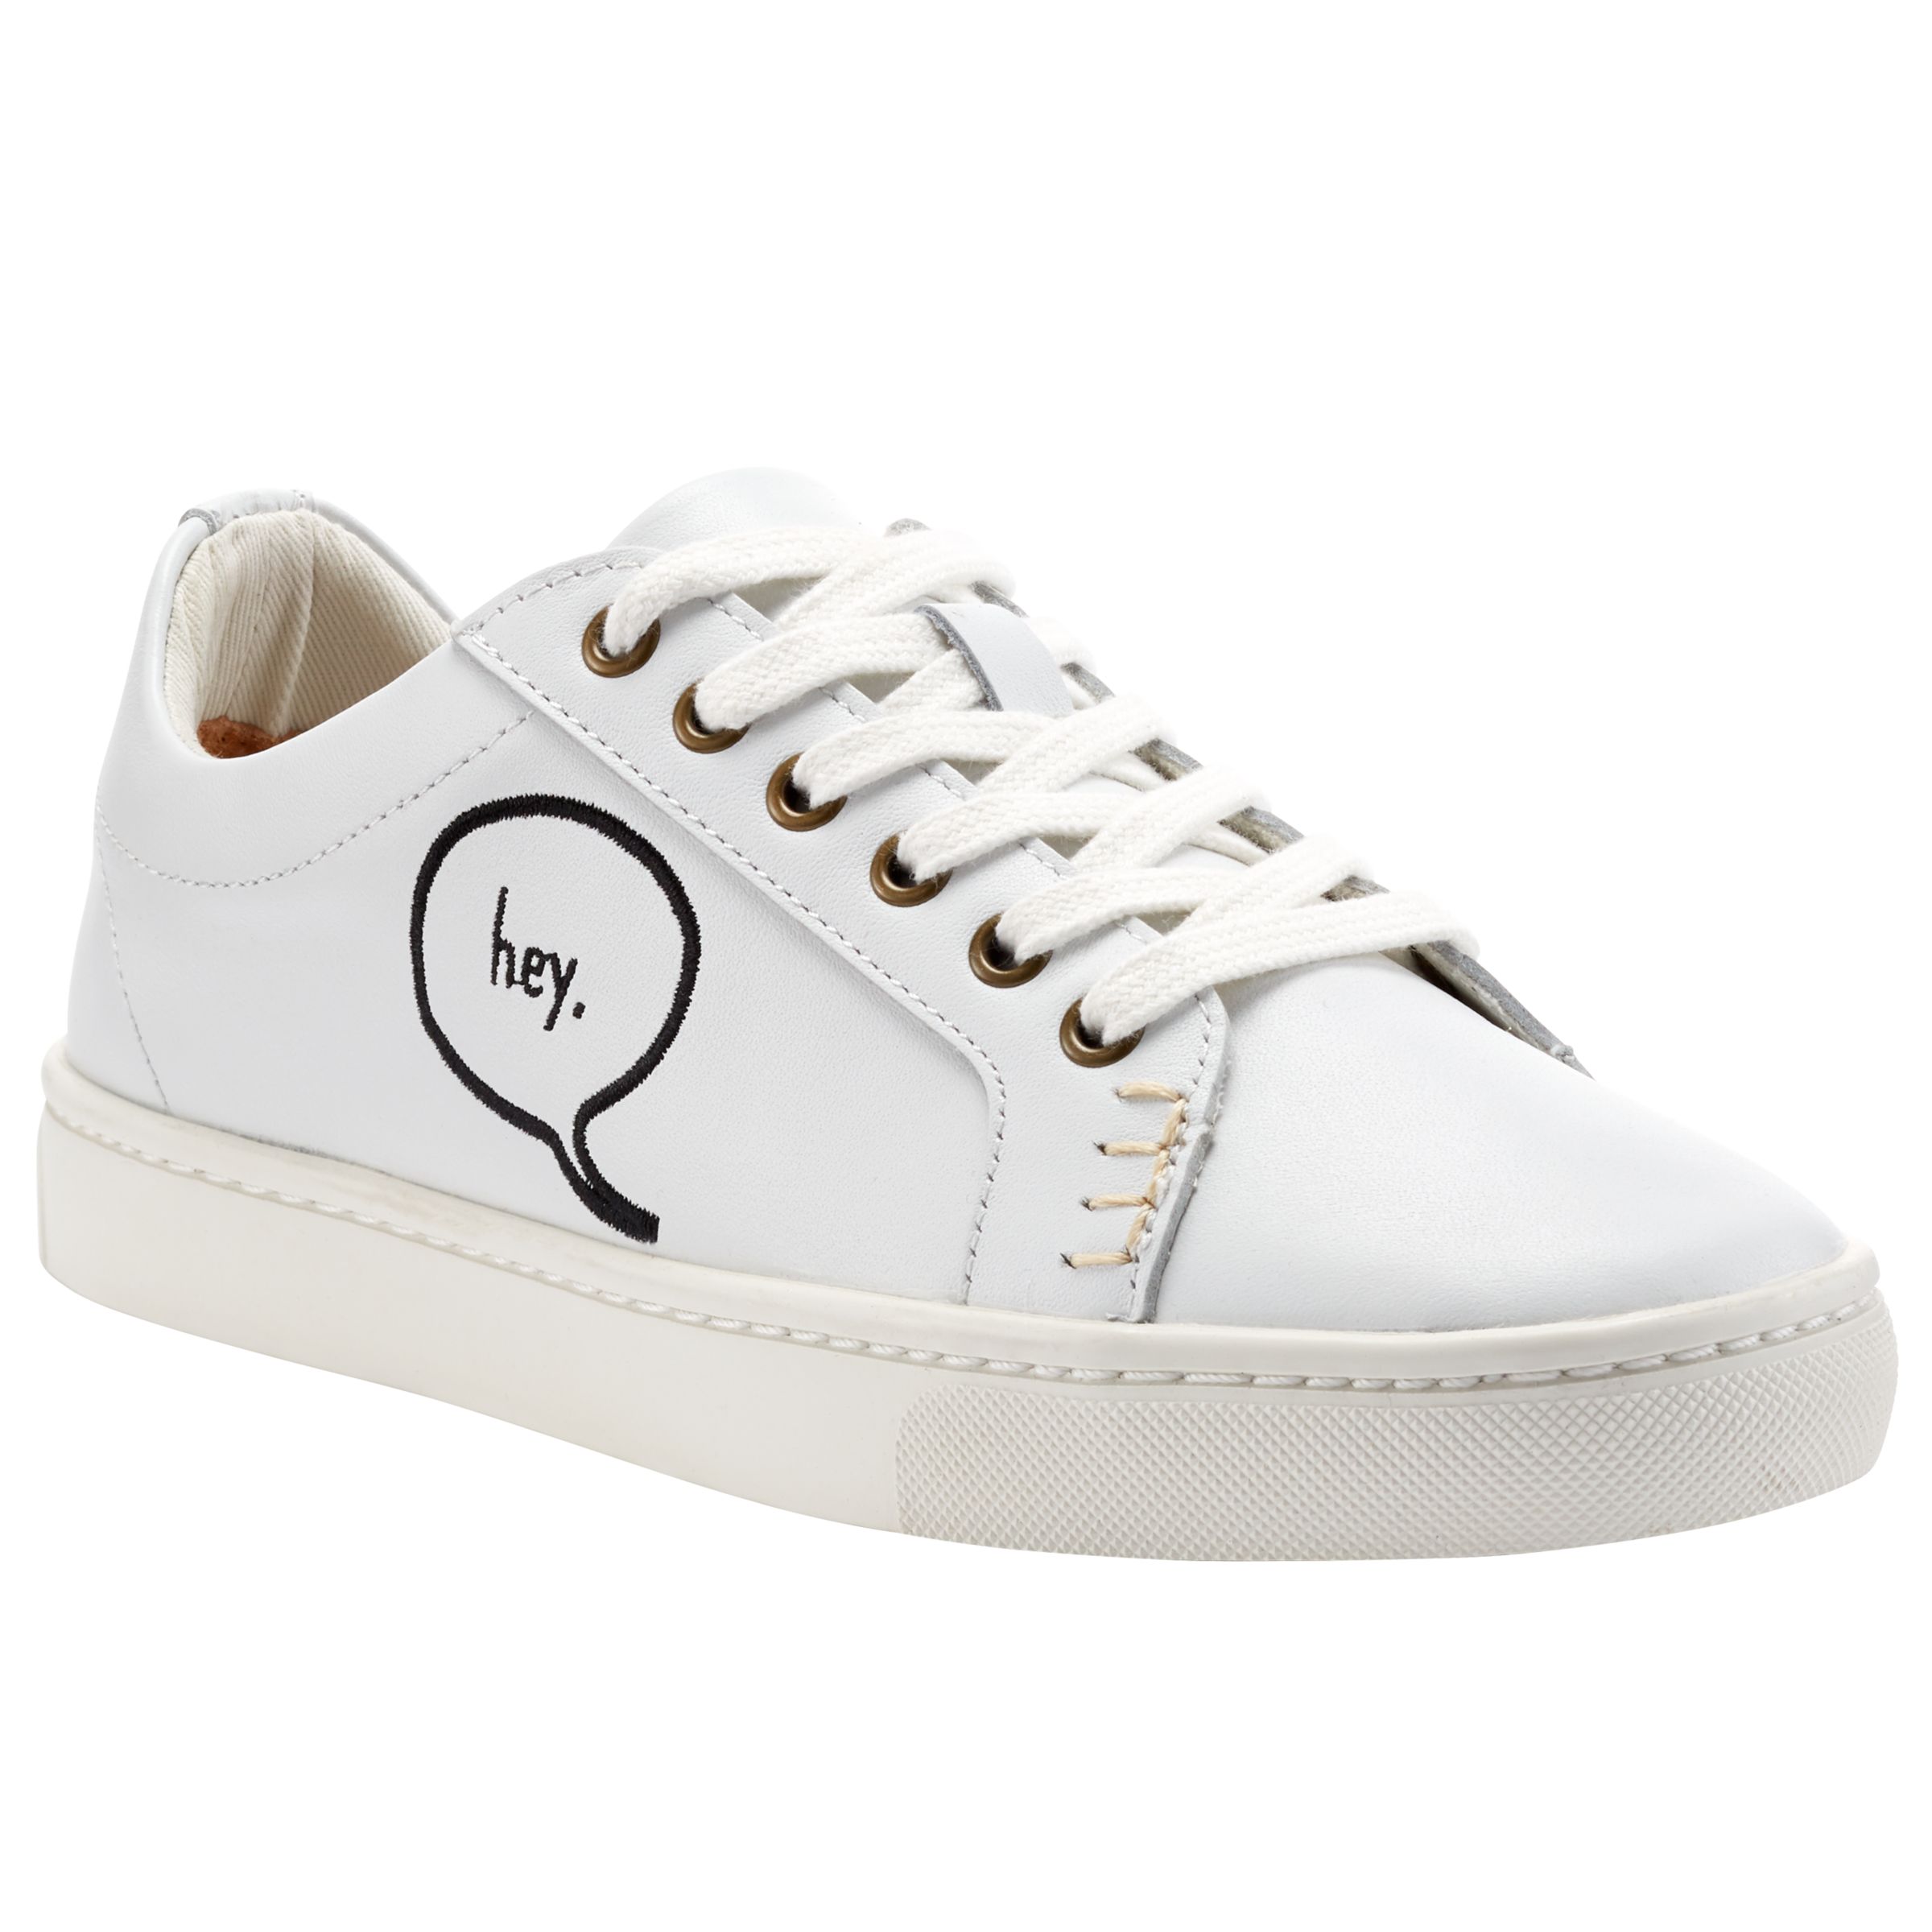 Soludos Embroidered Lace-Up Trainers, White, 4